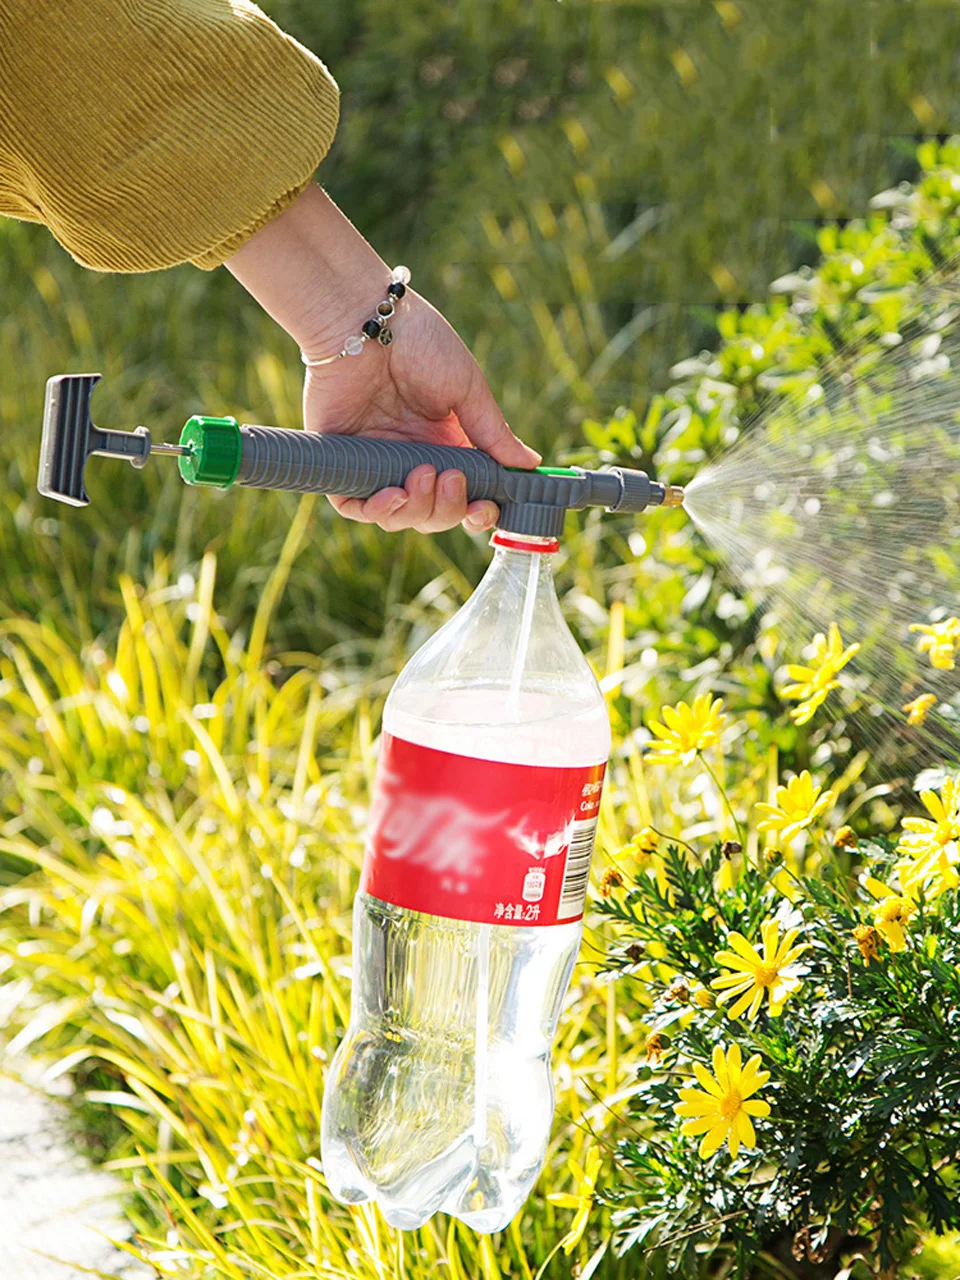 

Household Watering Nozzles Coke Sprite Beverage Bottle Universal Sprayer Accessories Sprinkler Spray Can Atomizing Nozzle